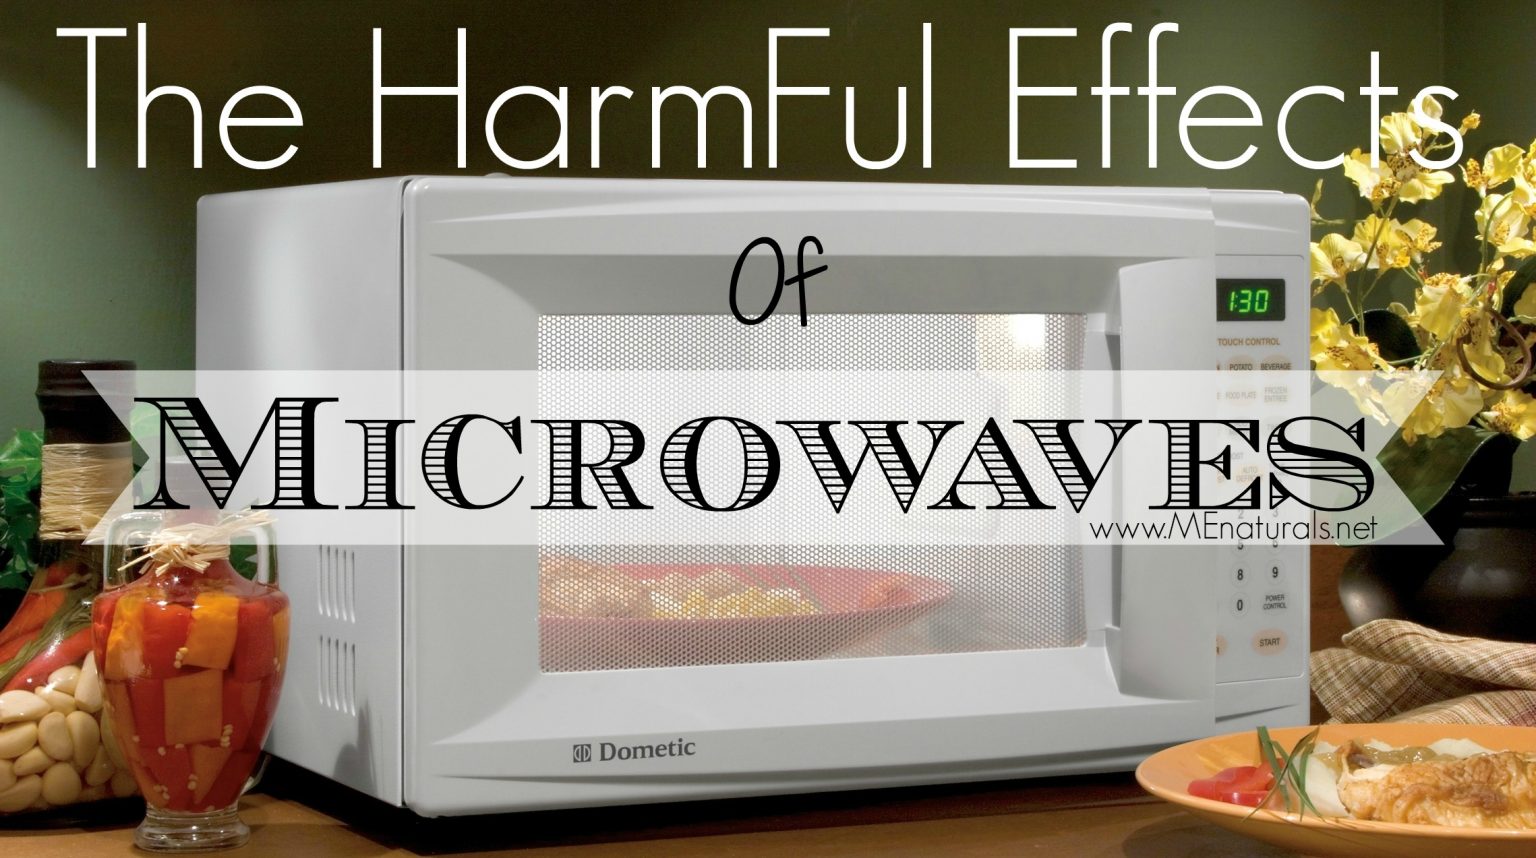 Microwave |The Harmful Effects